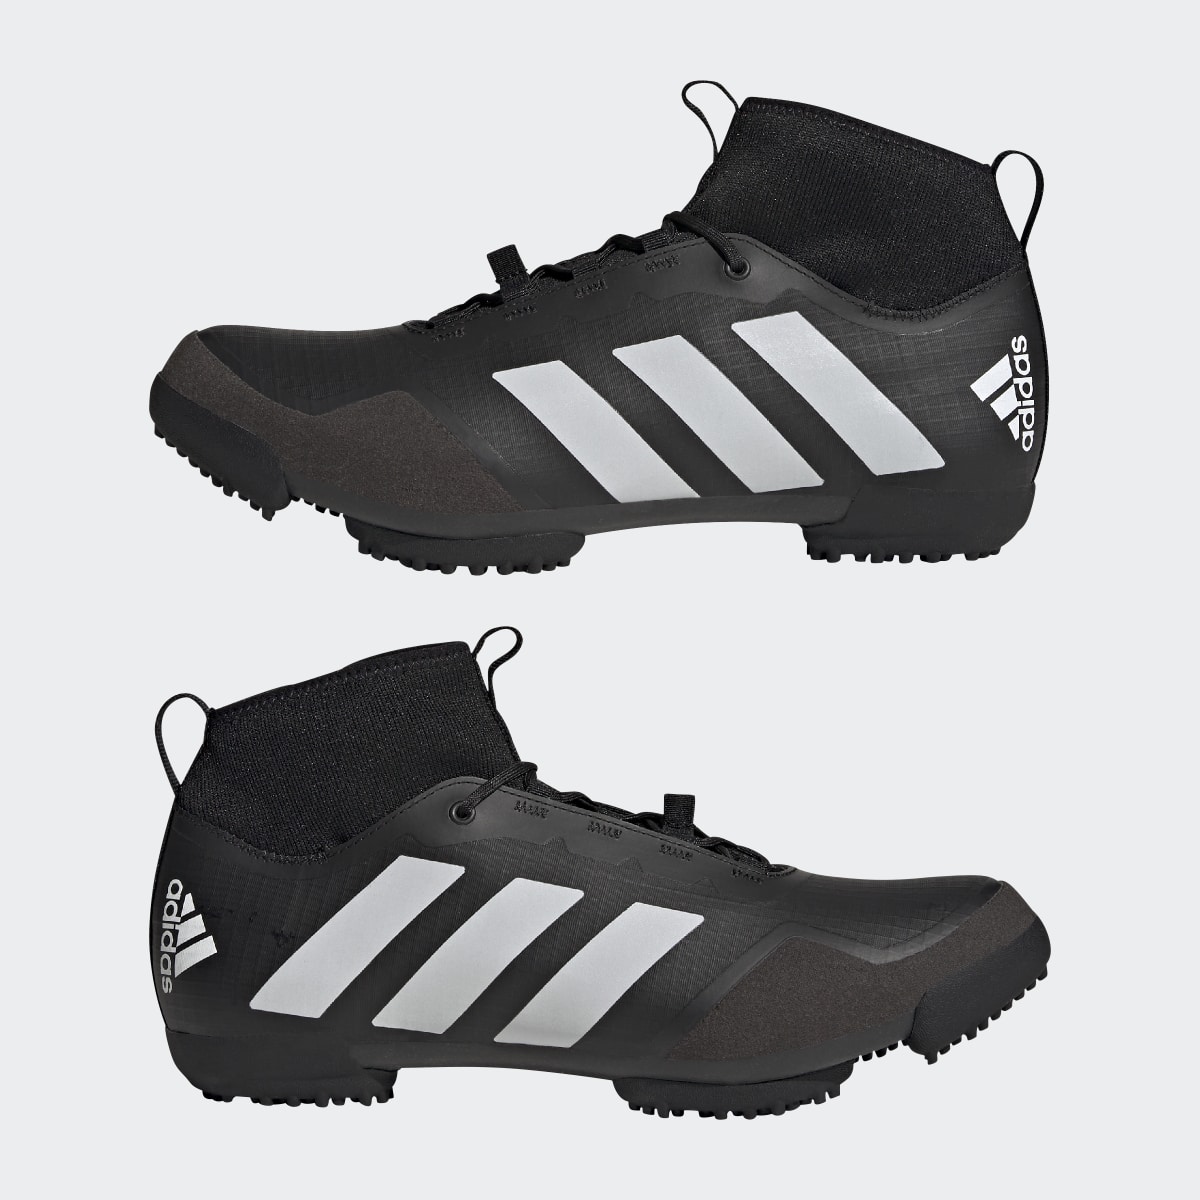 Adidas The Gravel Cycling Shoes. 8